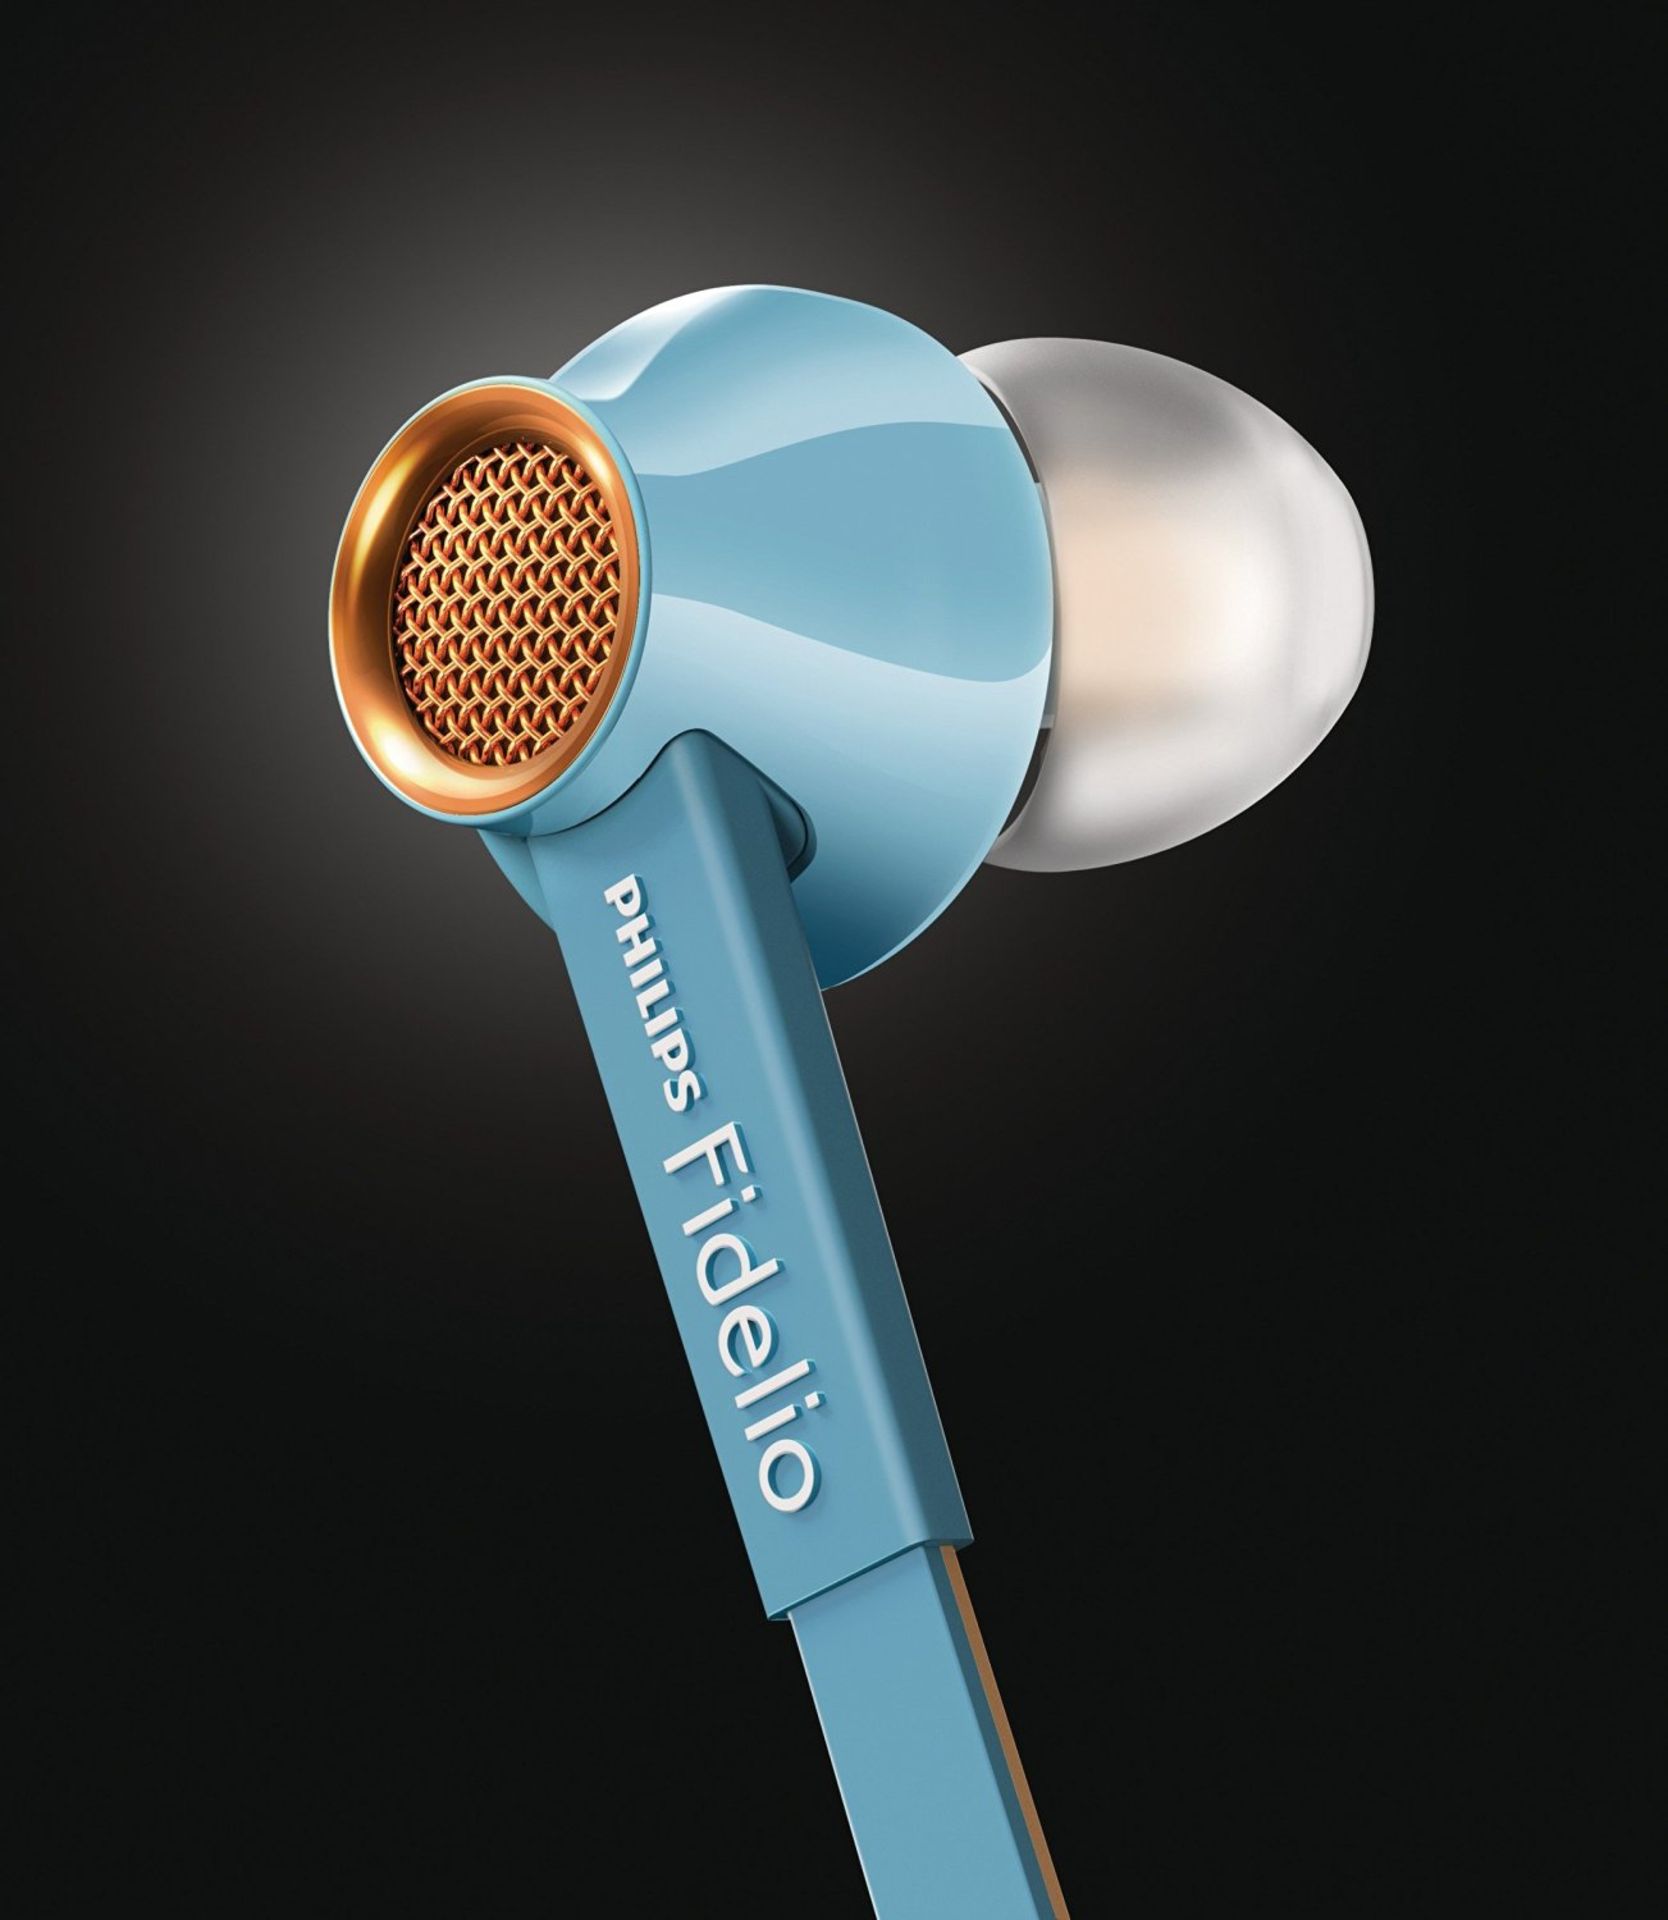 V *TRADE QTY* Brand New Philips Fidelio In-Ear Headphones With Mic S2LB/00 - In Line Remote/ - Image 2 of 4